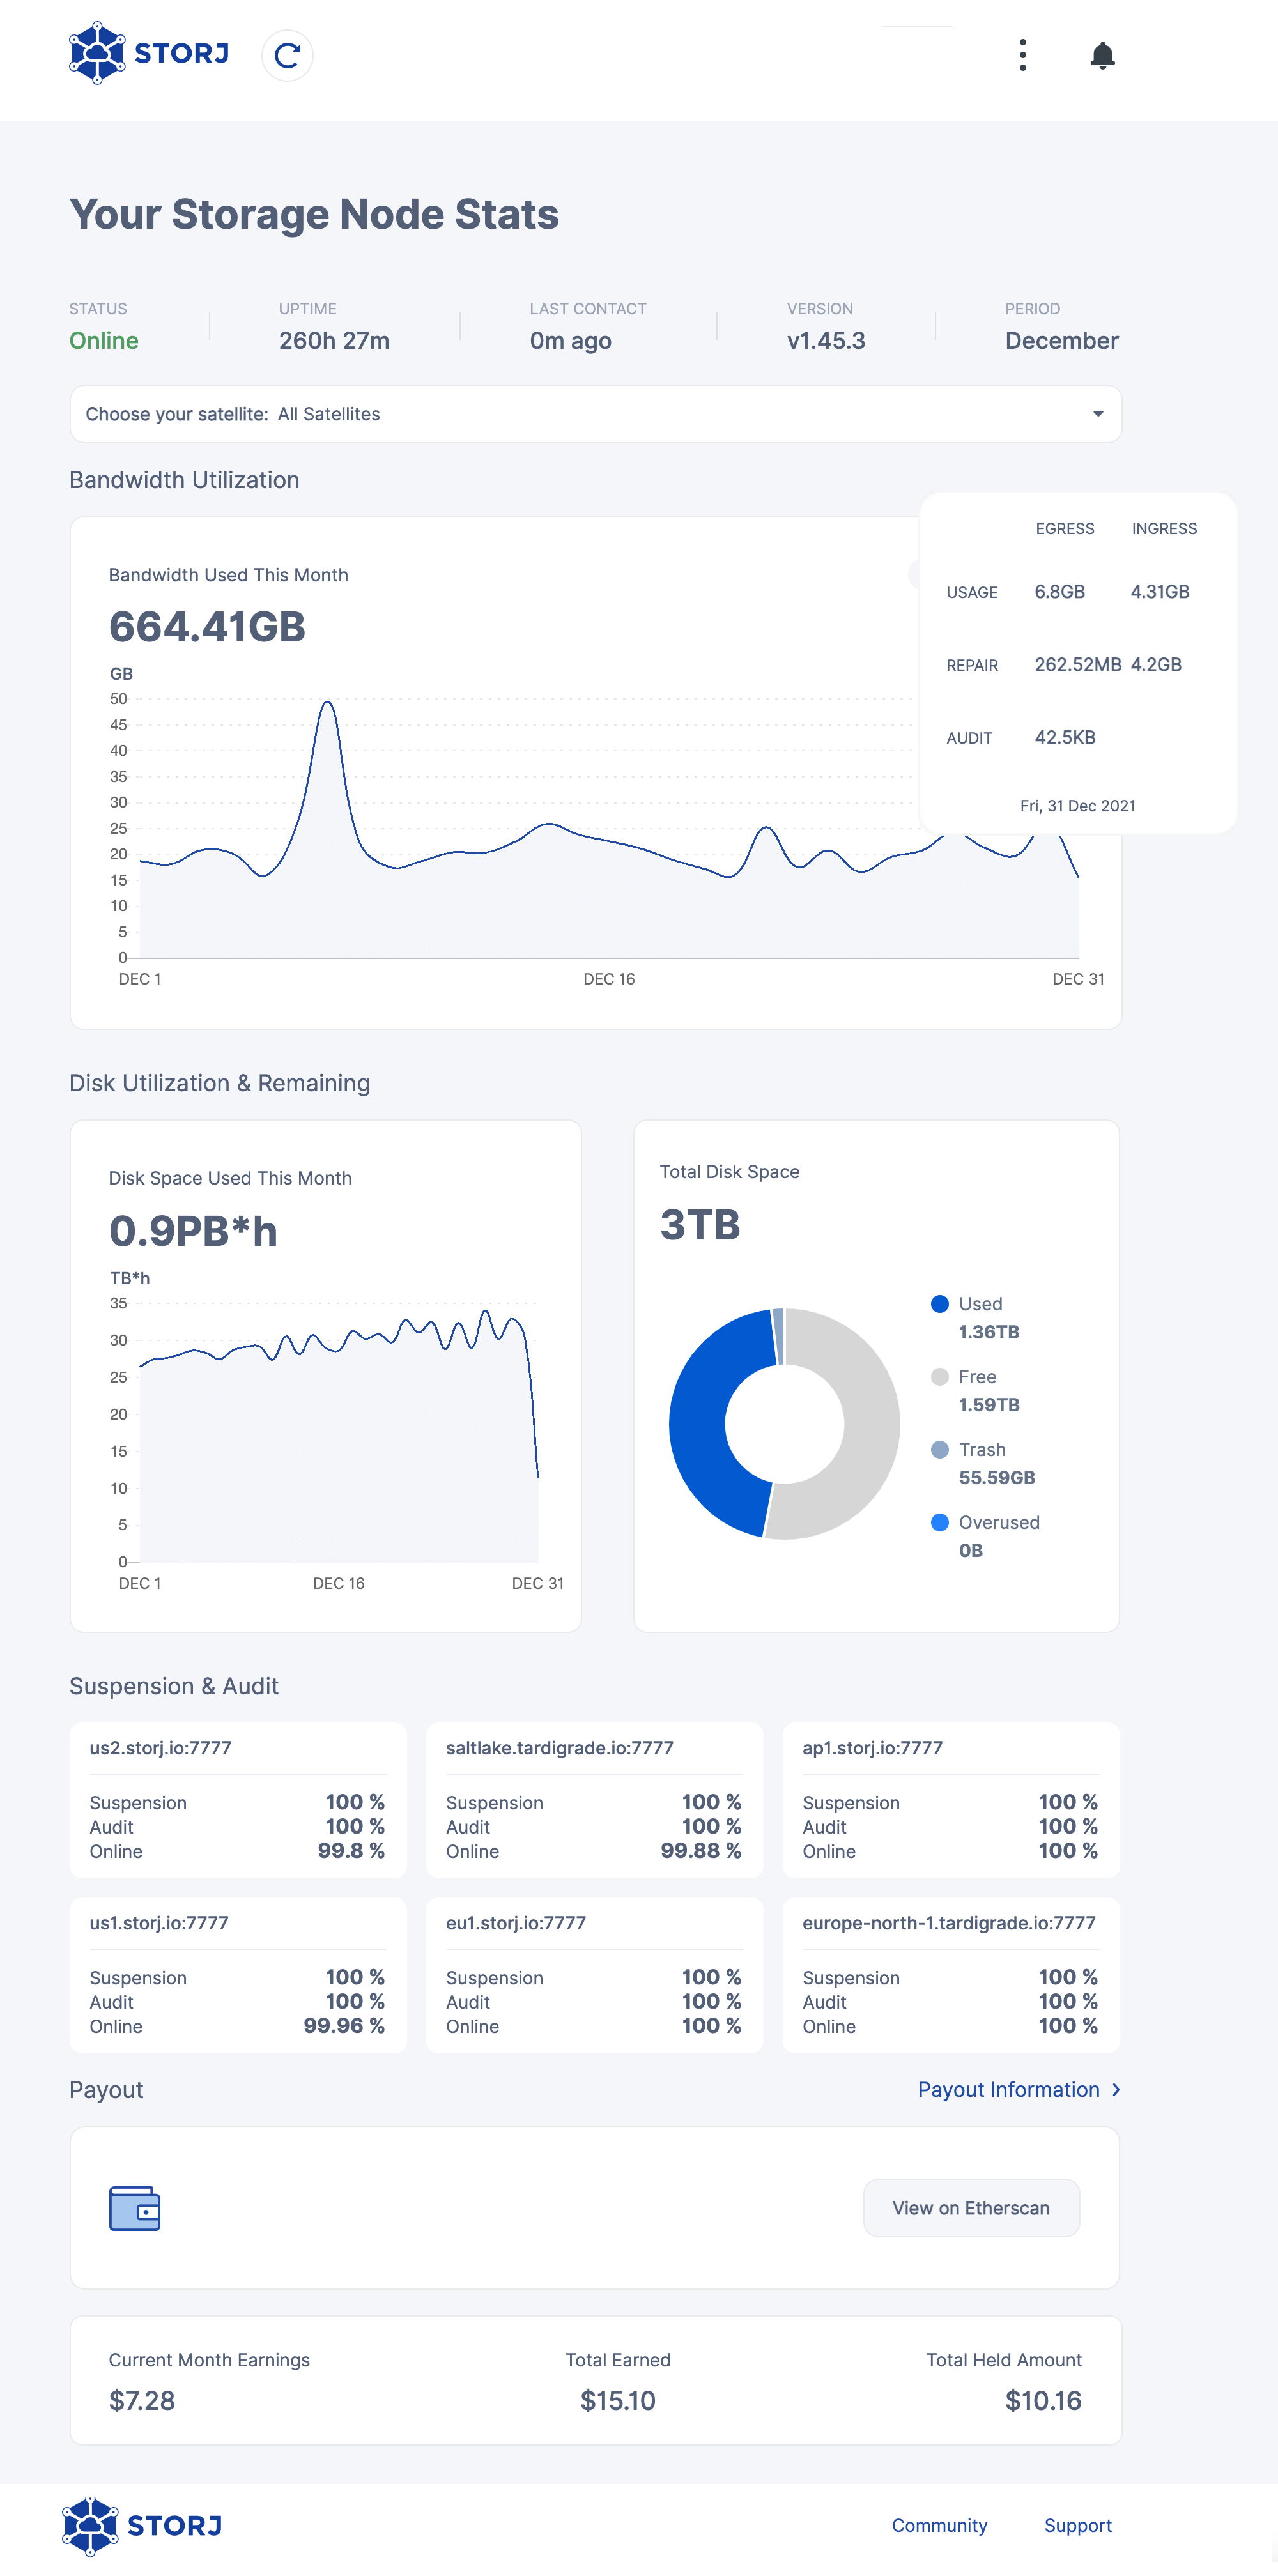 Storj Dashboard end of December 2021. Bandwidth used: 664.41 GB. Hours of storage used: 0.9 PB*h. Total available storage: 3 TB. Used storage: 1.36 TB. Free disk space: 1.36 TB. Recycle bin: 55.59 GB. Earnings this month: $7.28. Total earnings: $15.10. Withheld earnings: $10.16.